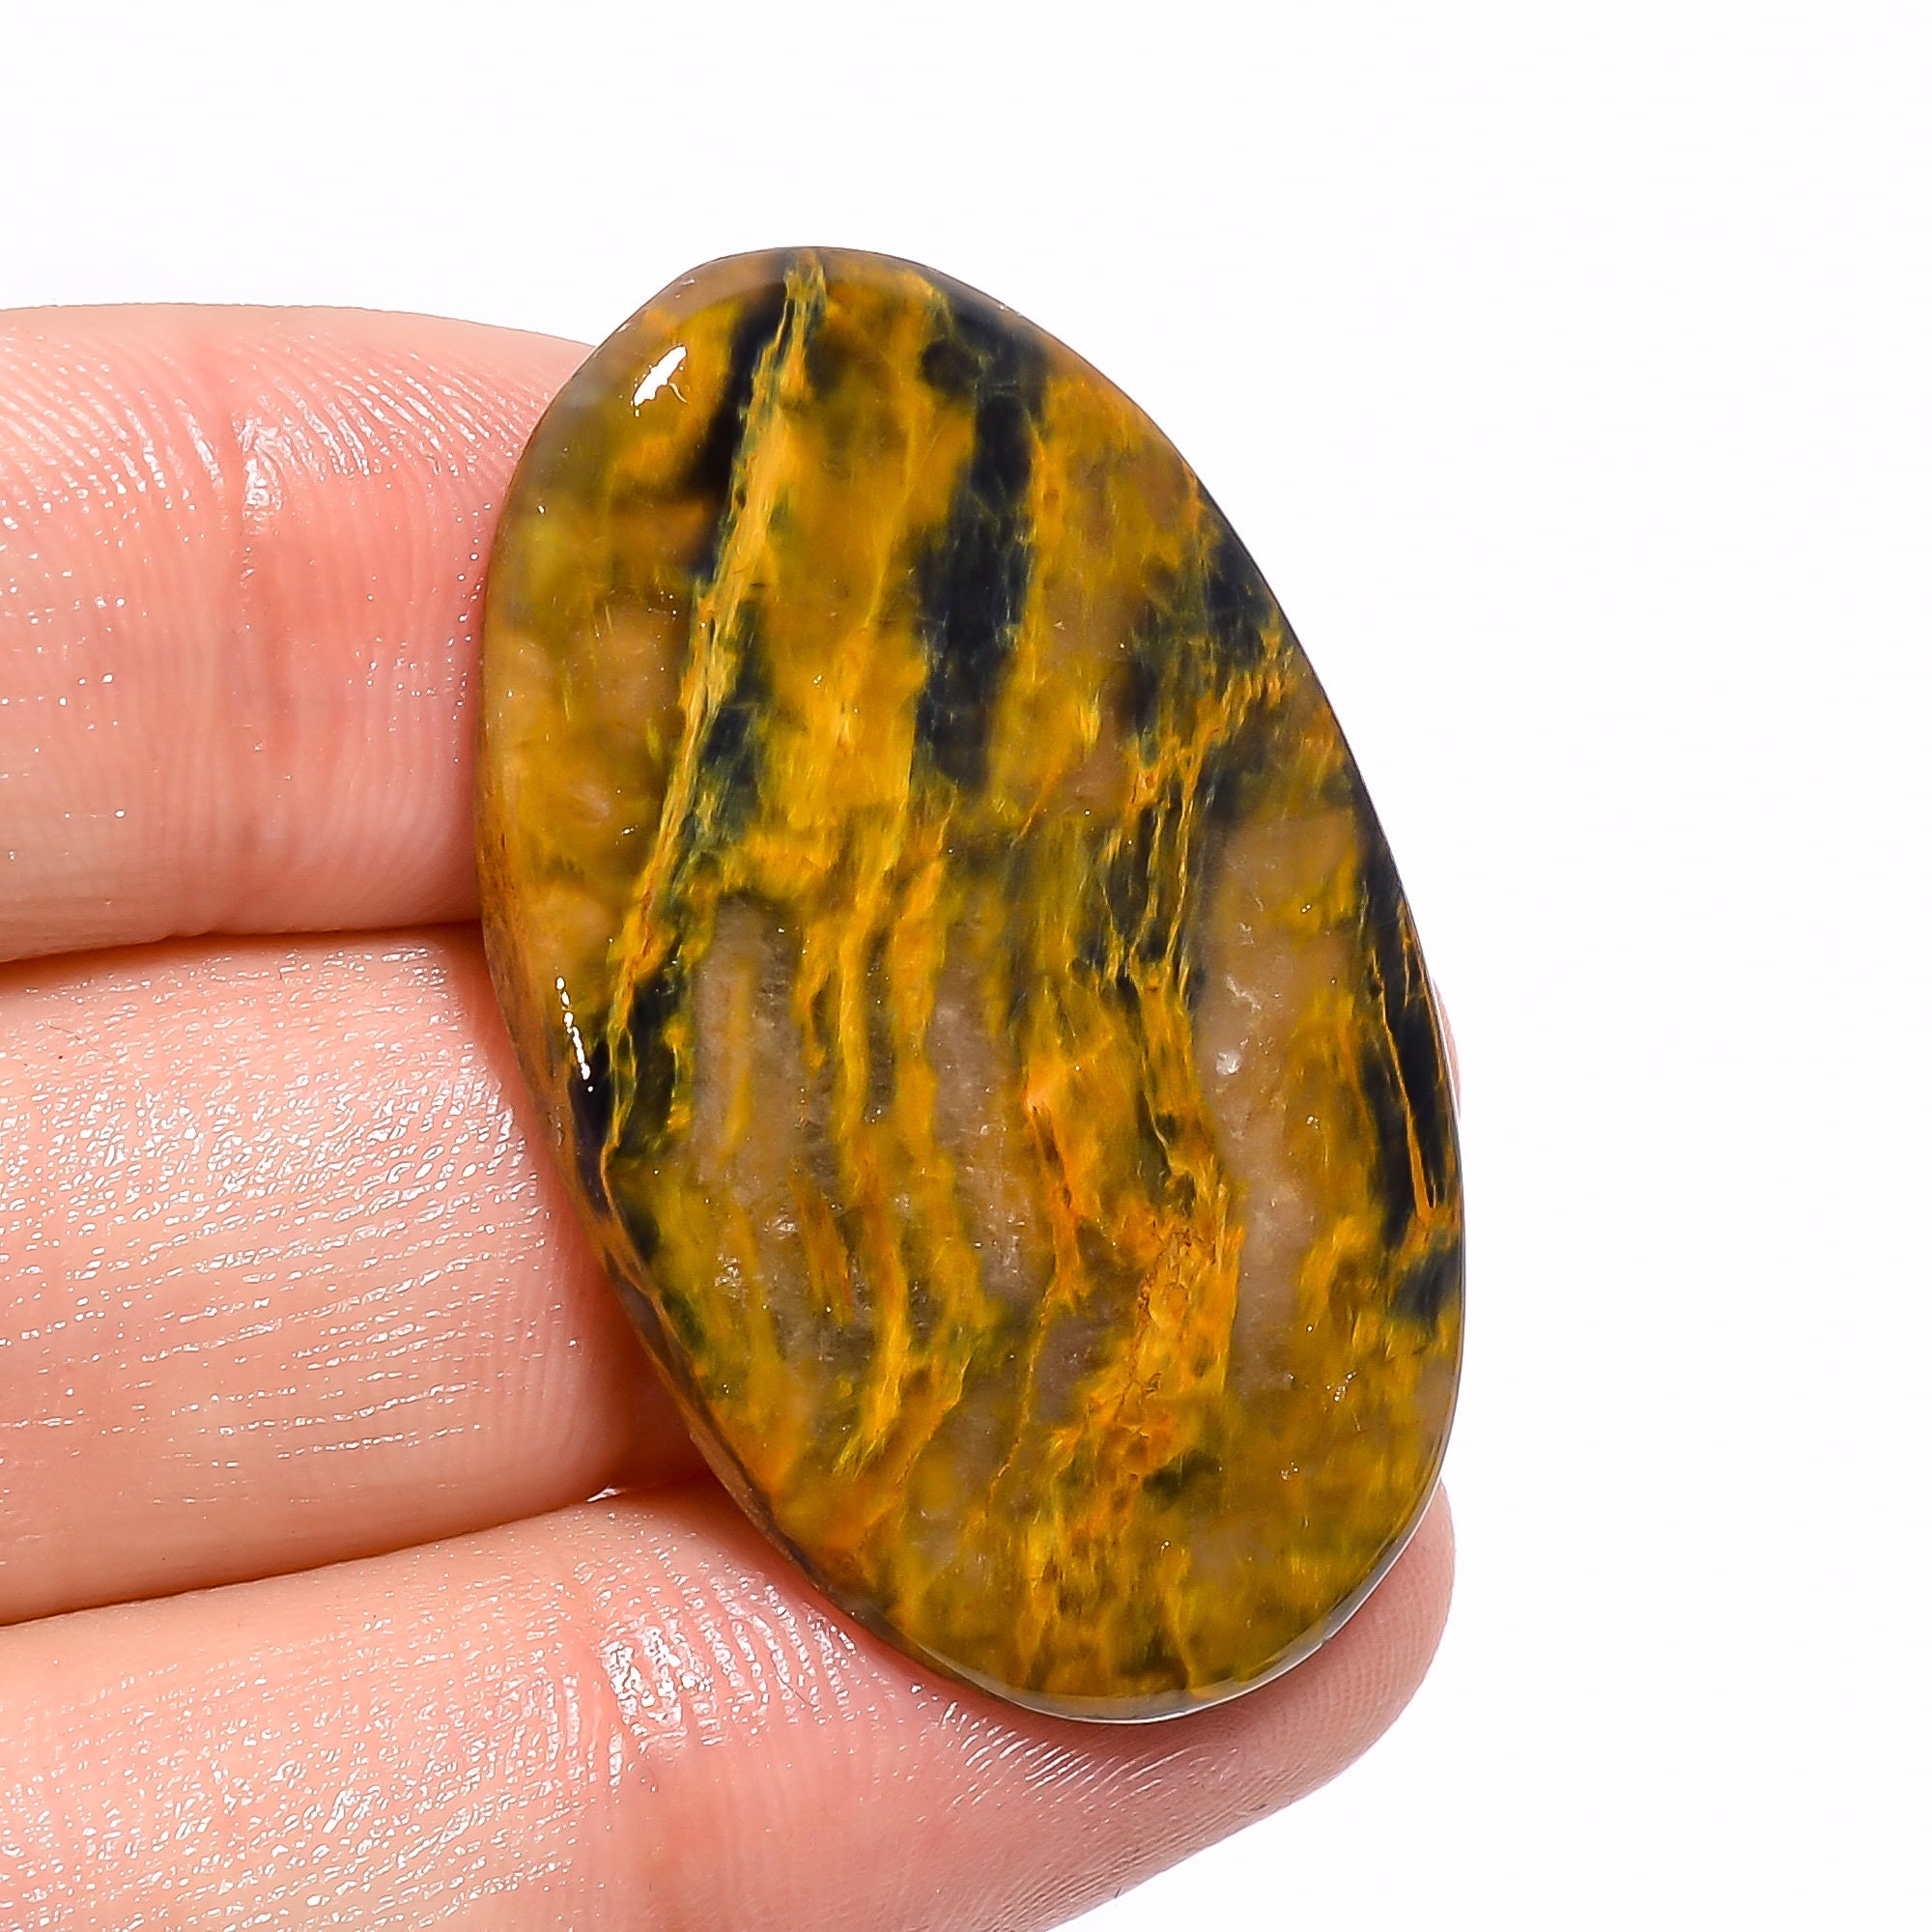 Superb Top Grade Quality 100% Natural Imperial Jasper Oval Shape Cabochon Loose Gemstone For Making Jewelry 24.5 Ct 36X14X6 mm SB-6824